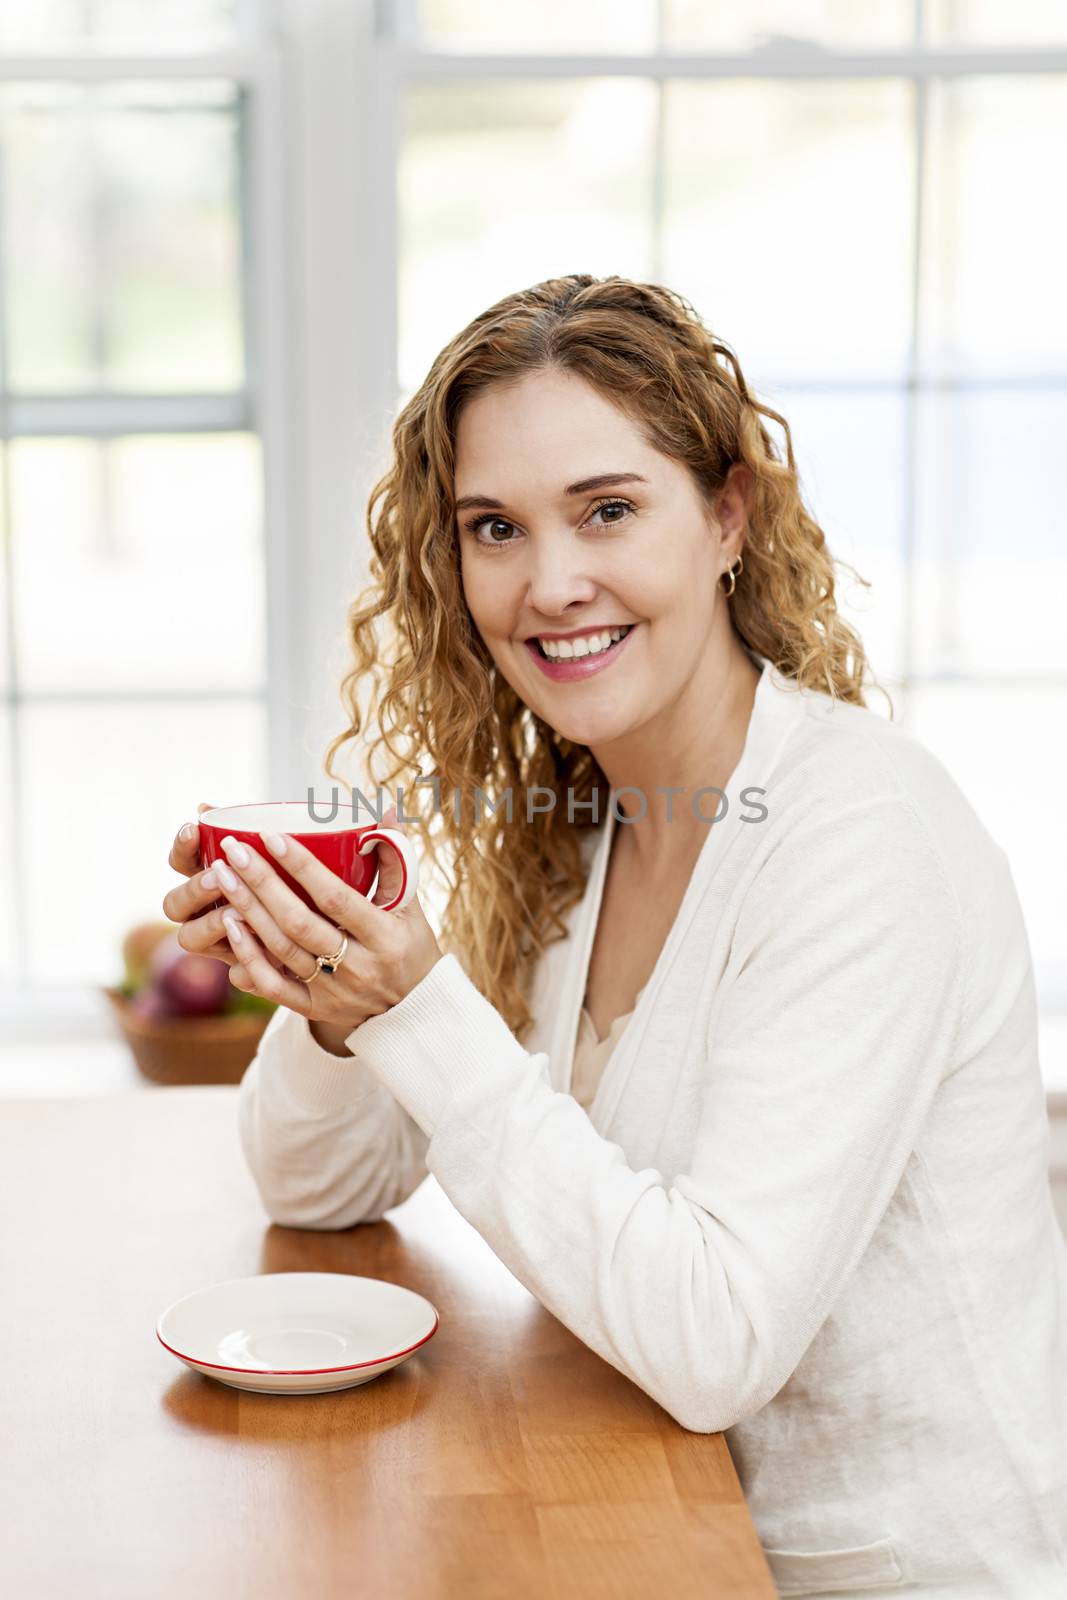 Smiling woman holding red coffee cup by elenathewise